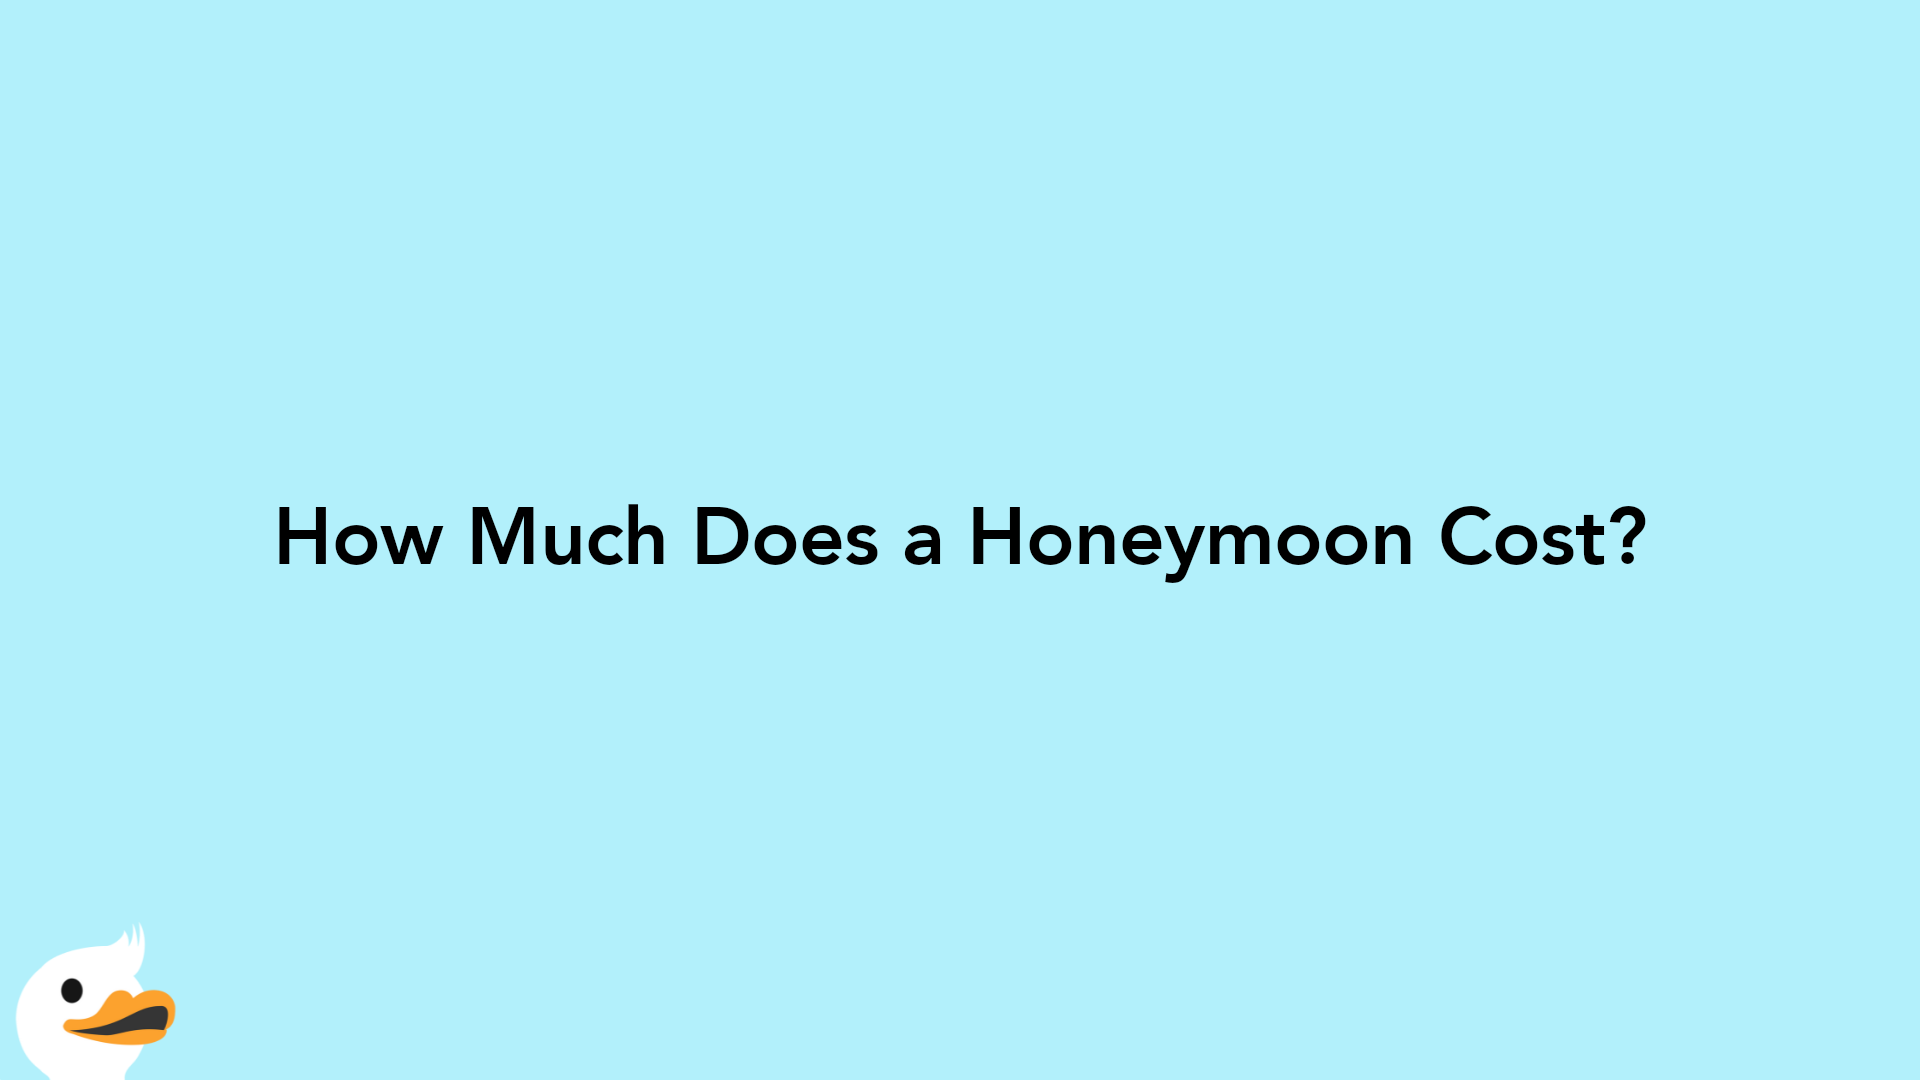 How Much Does a Honeymoon Cost?